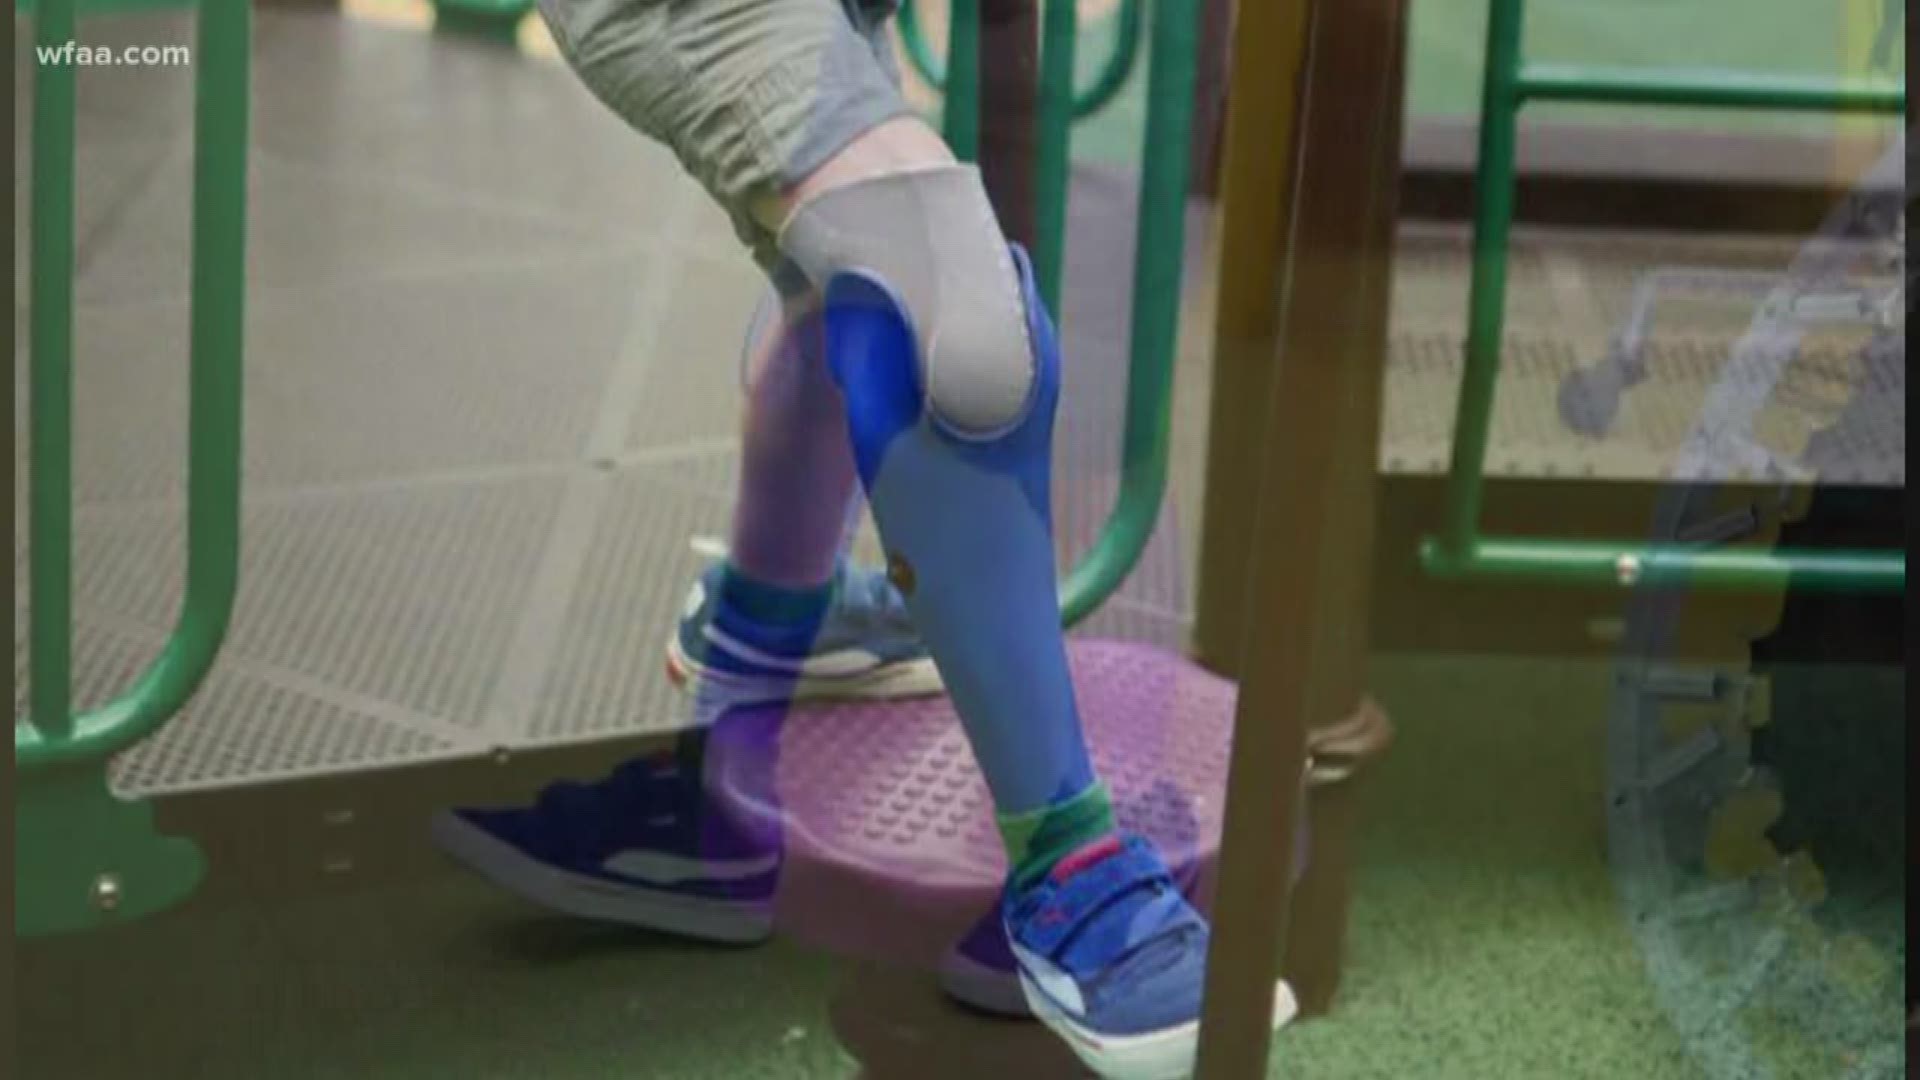 Scottish Rite Hospital for Children creating custom limbs for those in need